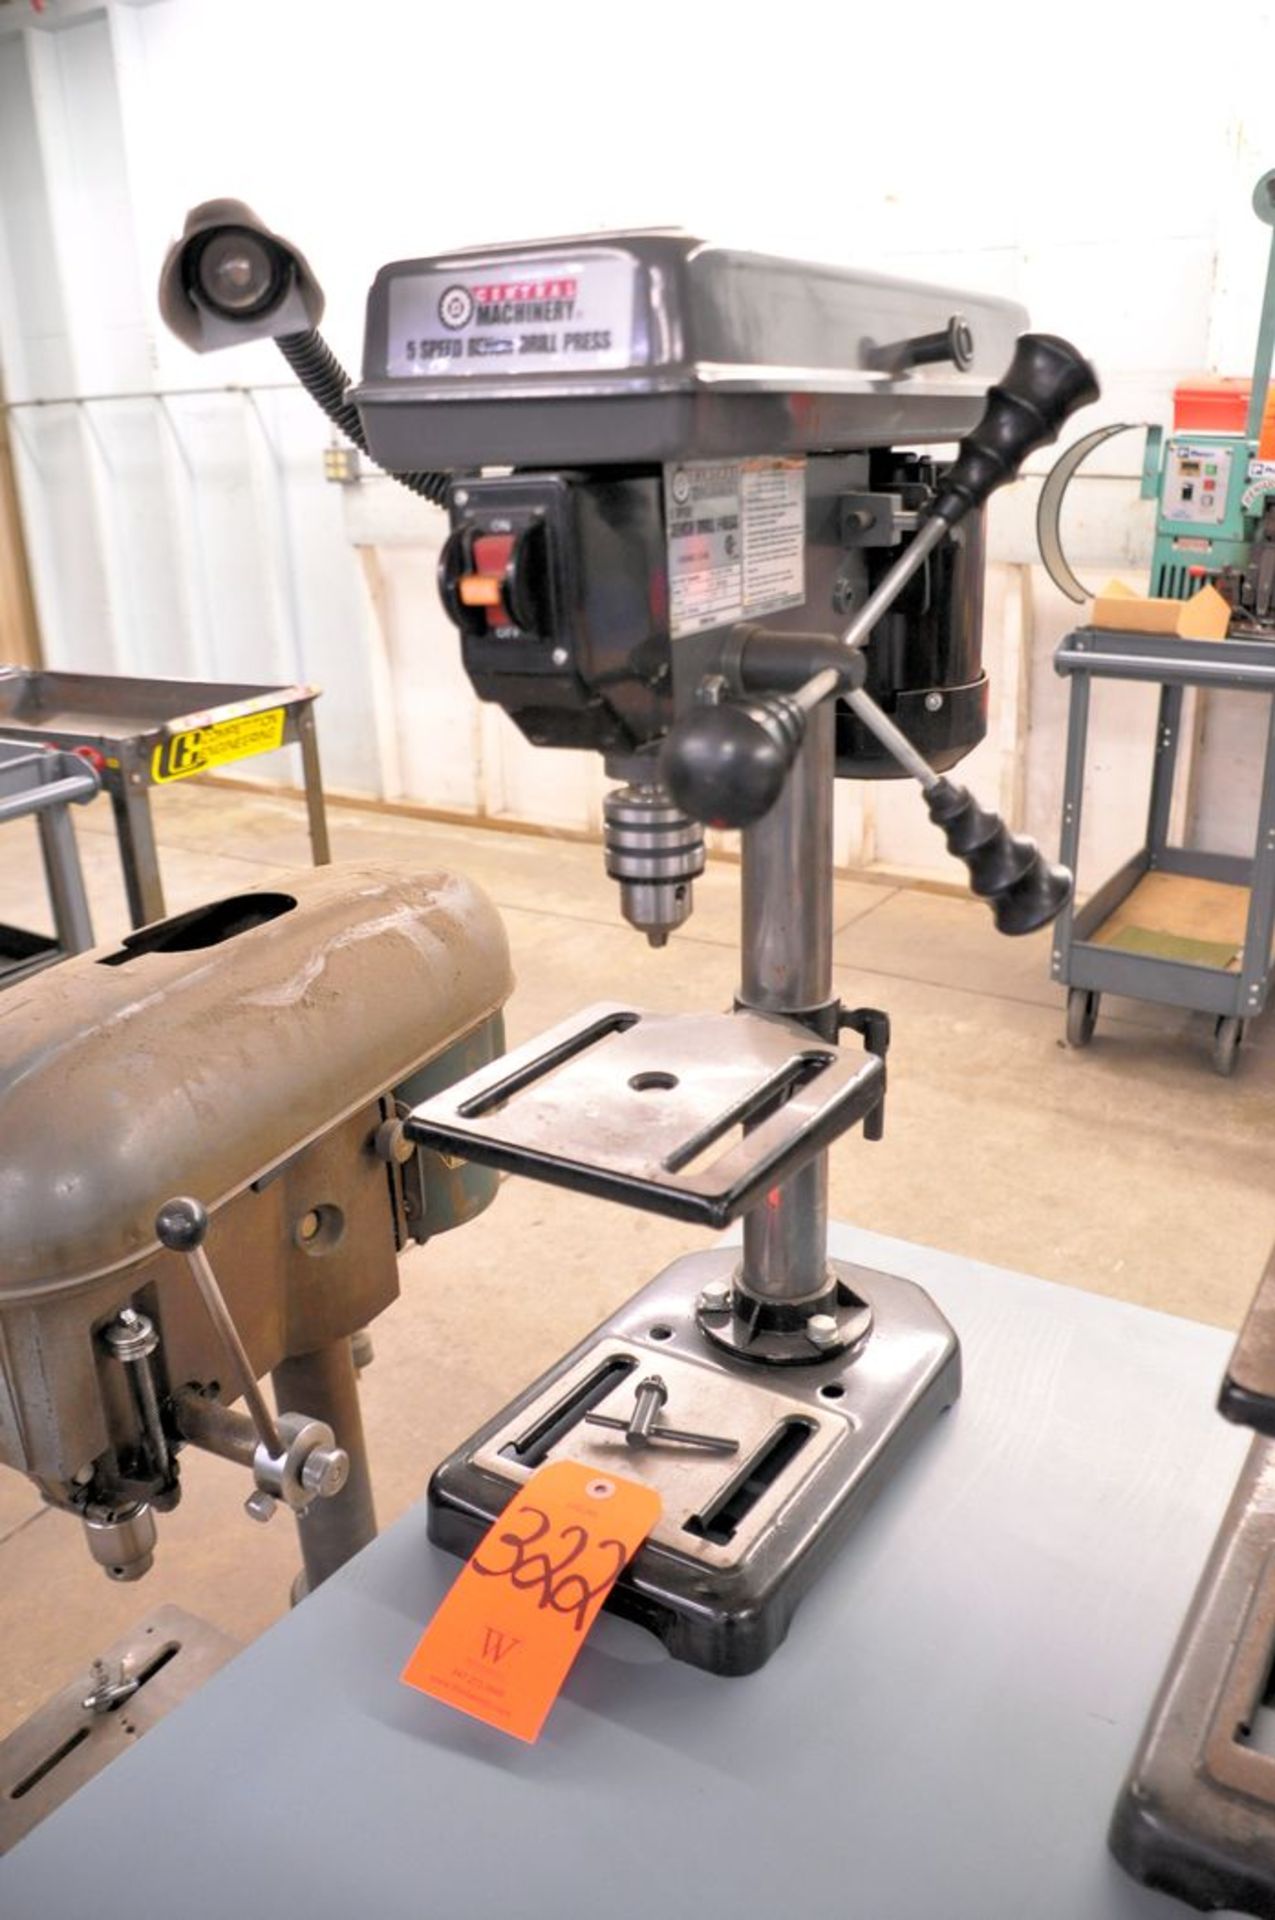 Central Machinery 5 Spd. Bench Drill Press, S/N: 366851641 (2017); with 6 in. x 6 in. Work Table